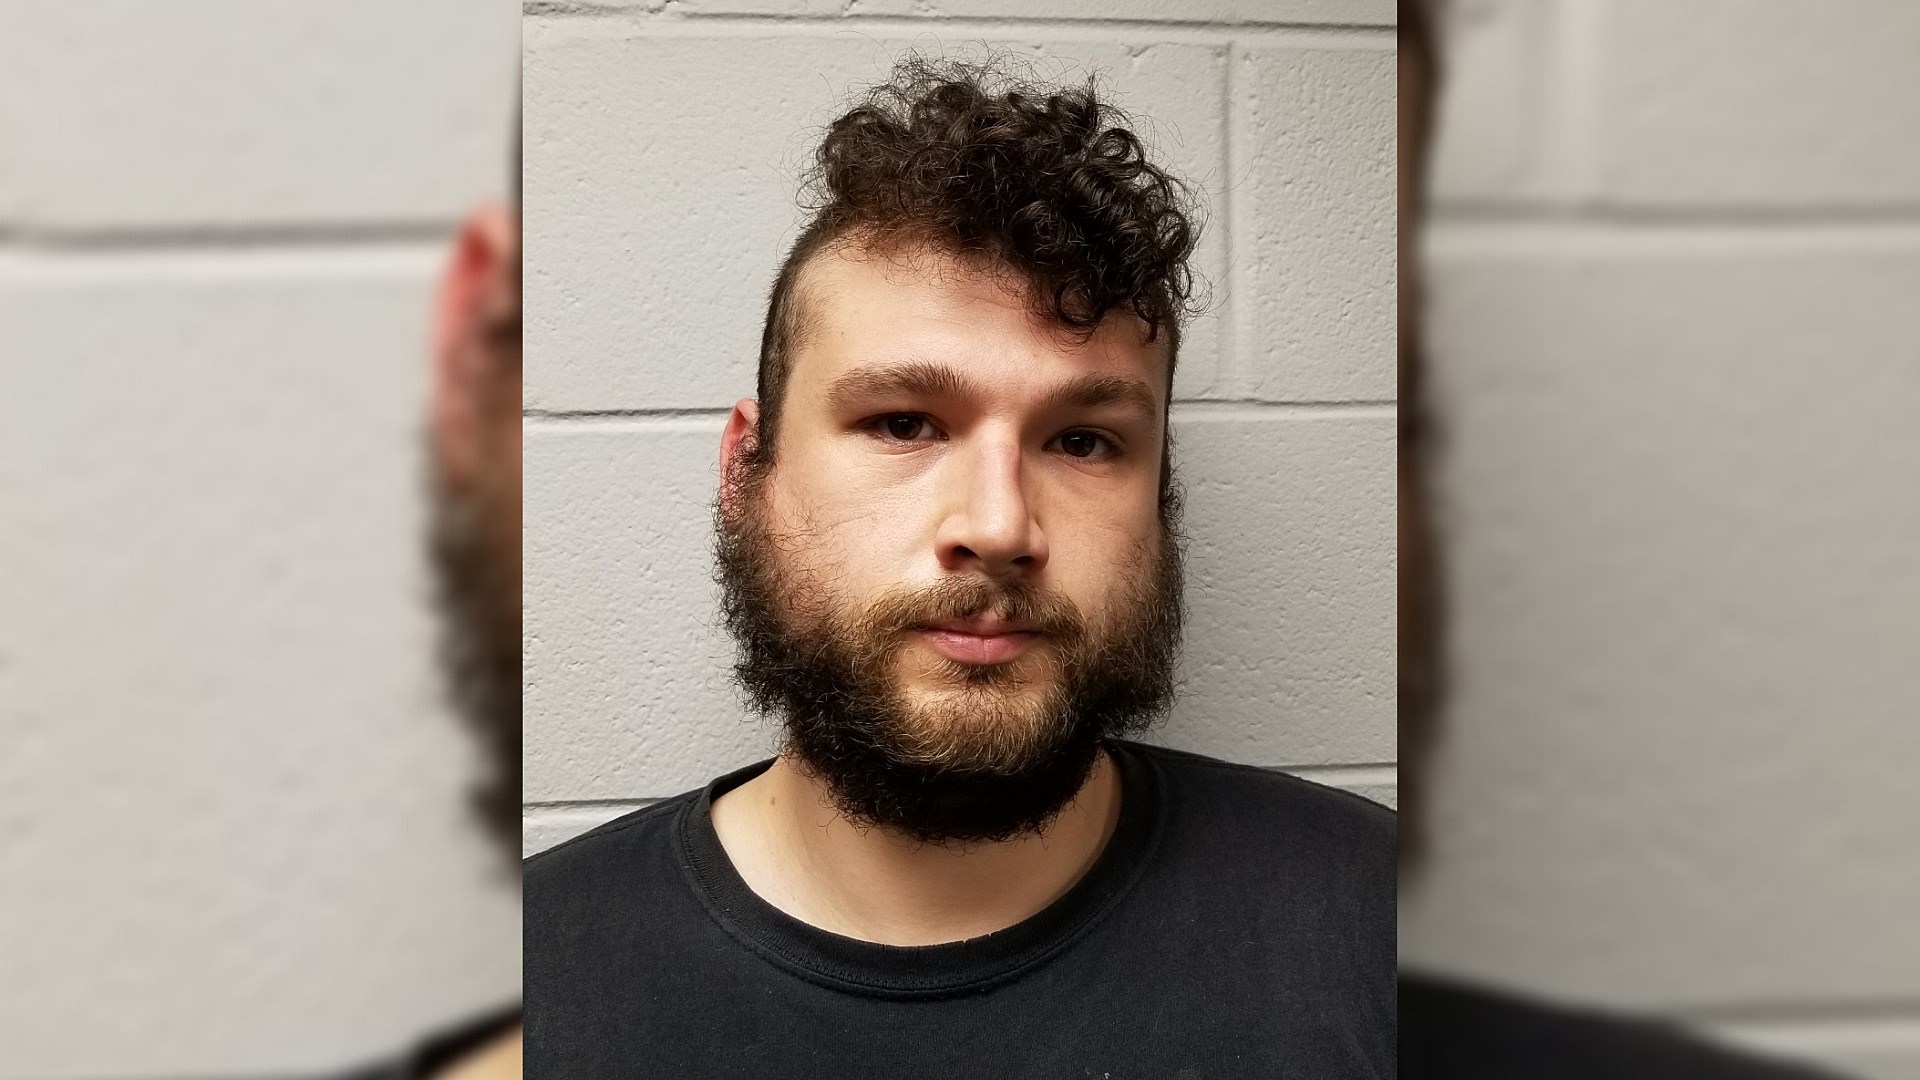 Camden County Man Charged With Endangering the Welfare of a Child